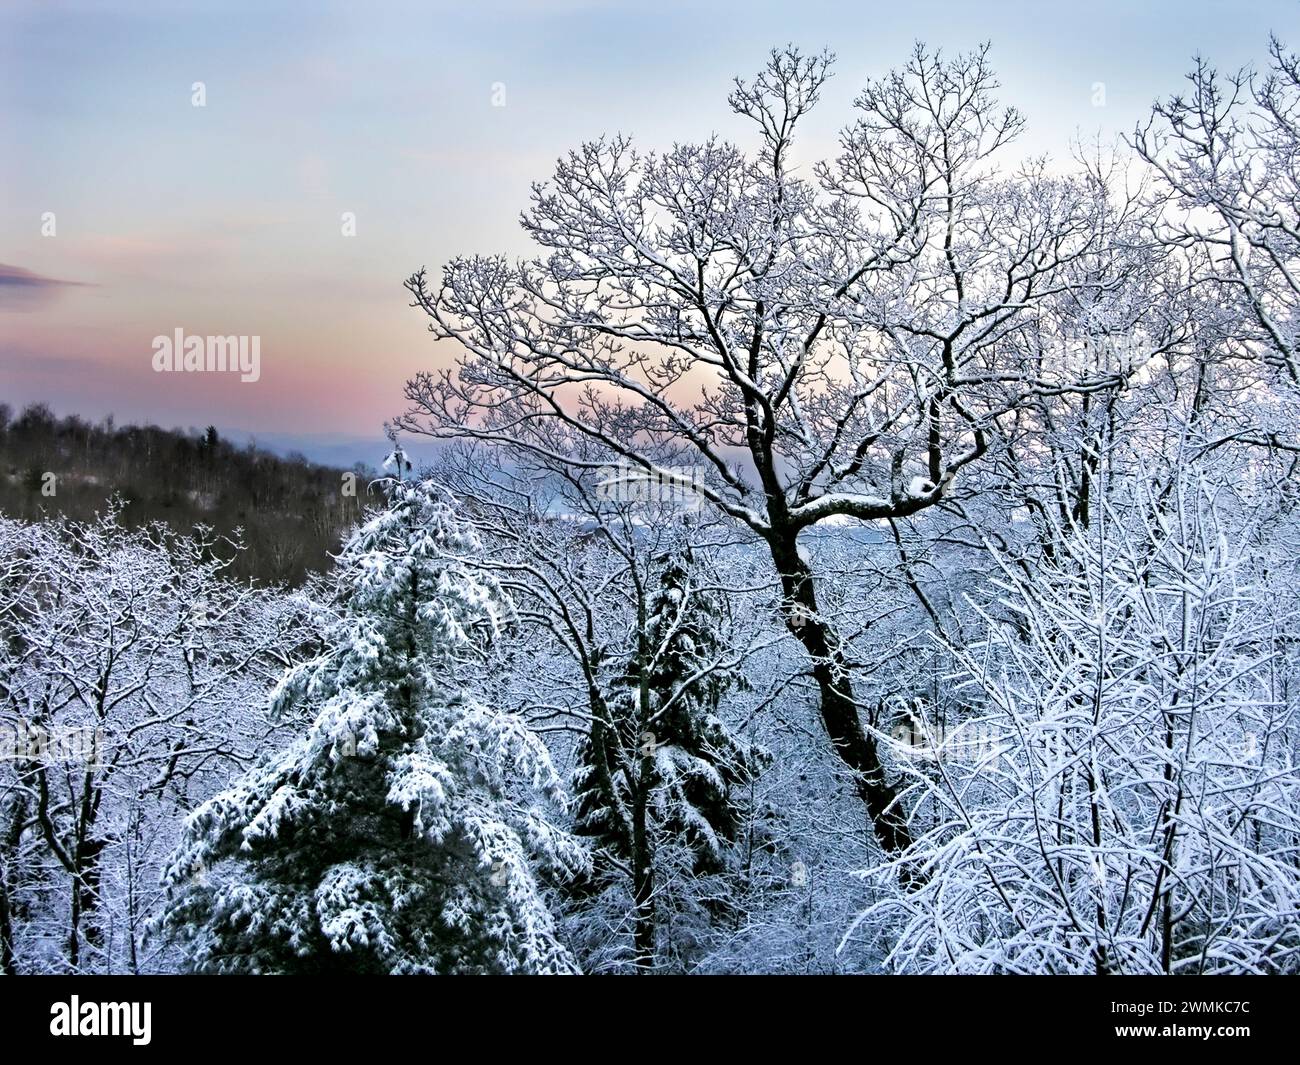 Snow-laden branches are in contrast to the pastels of a mountain dawn; United States of America Stock Photo